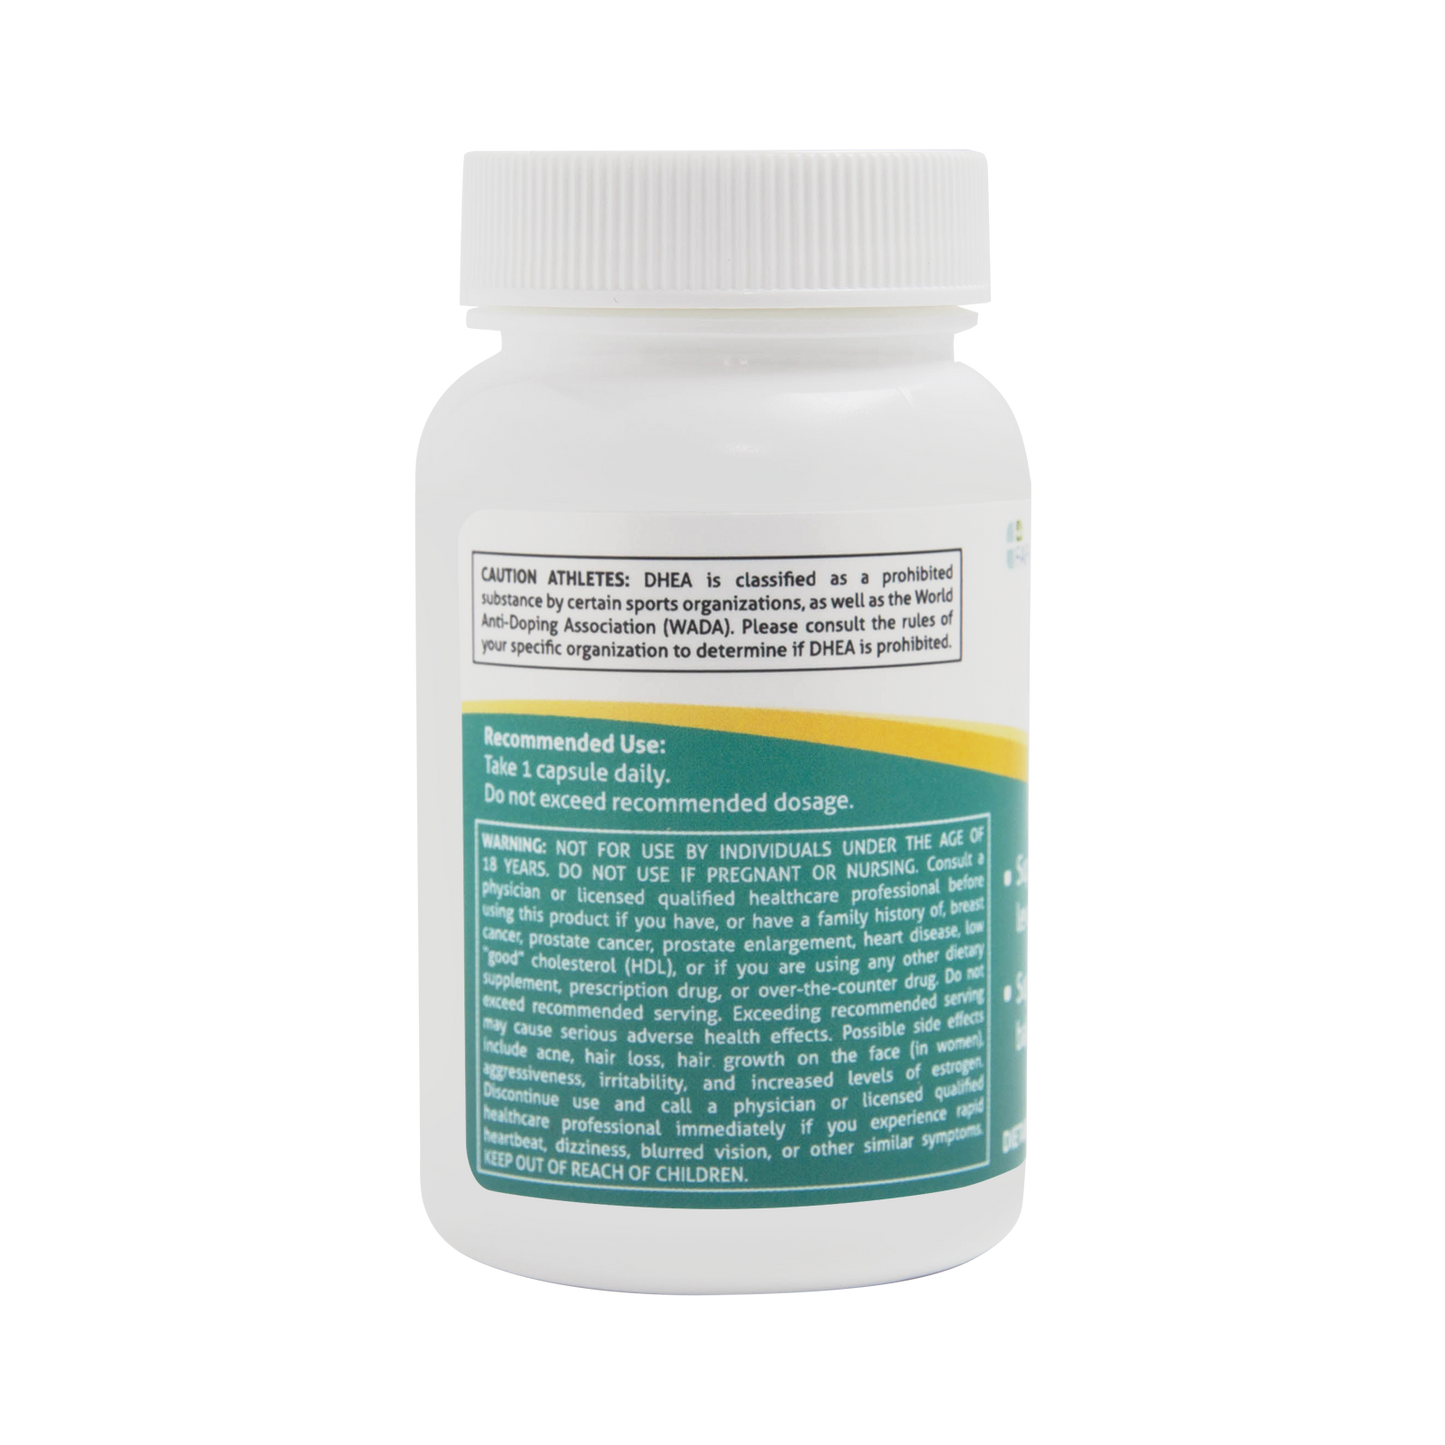 DHEA for Natural Hormone Balance